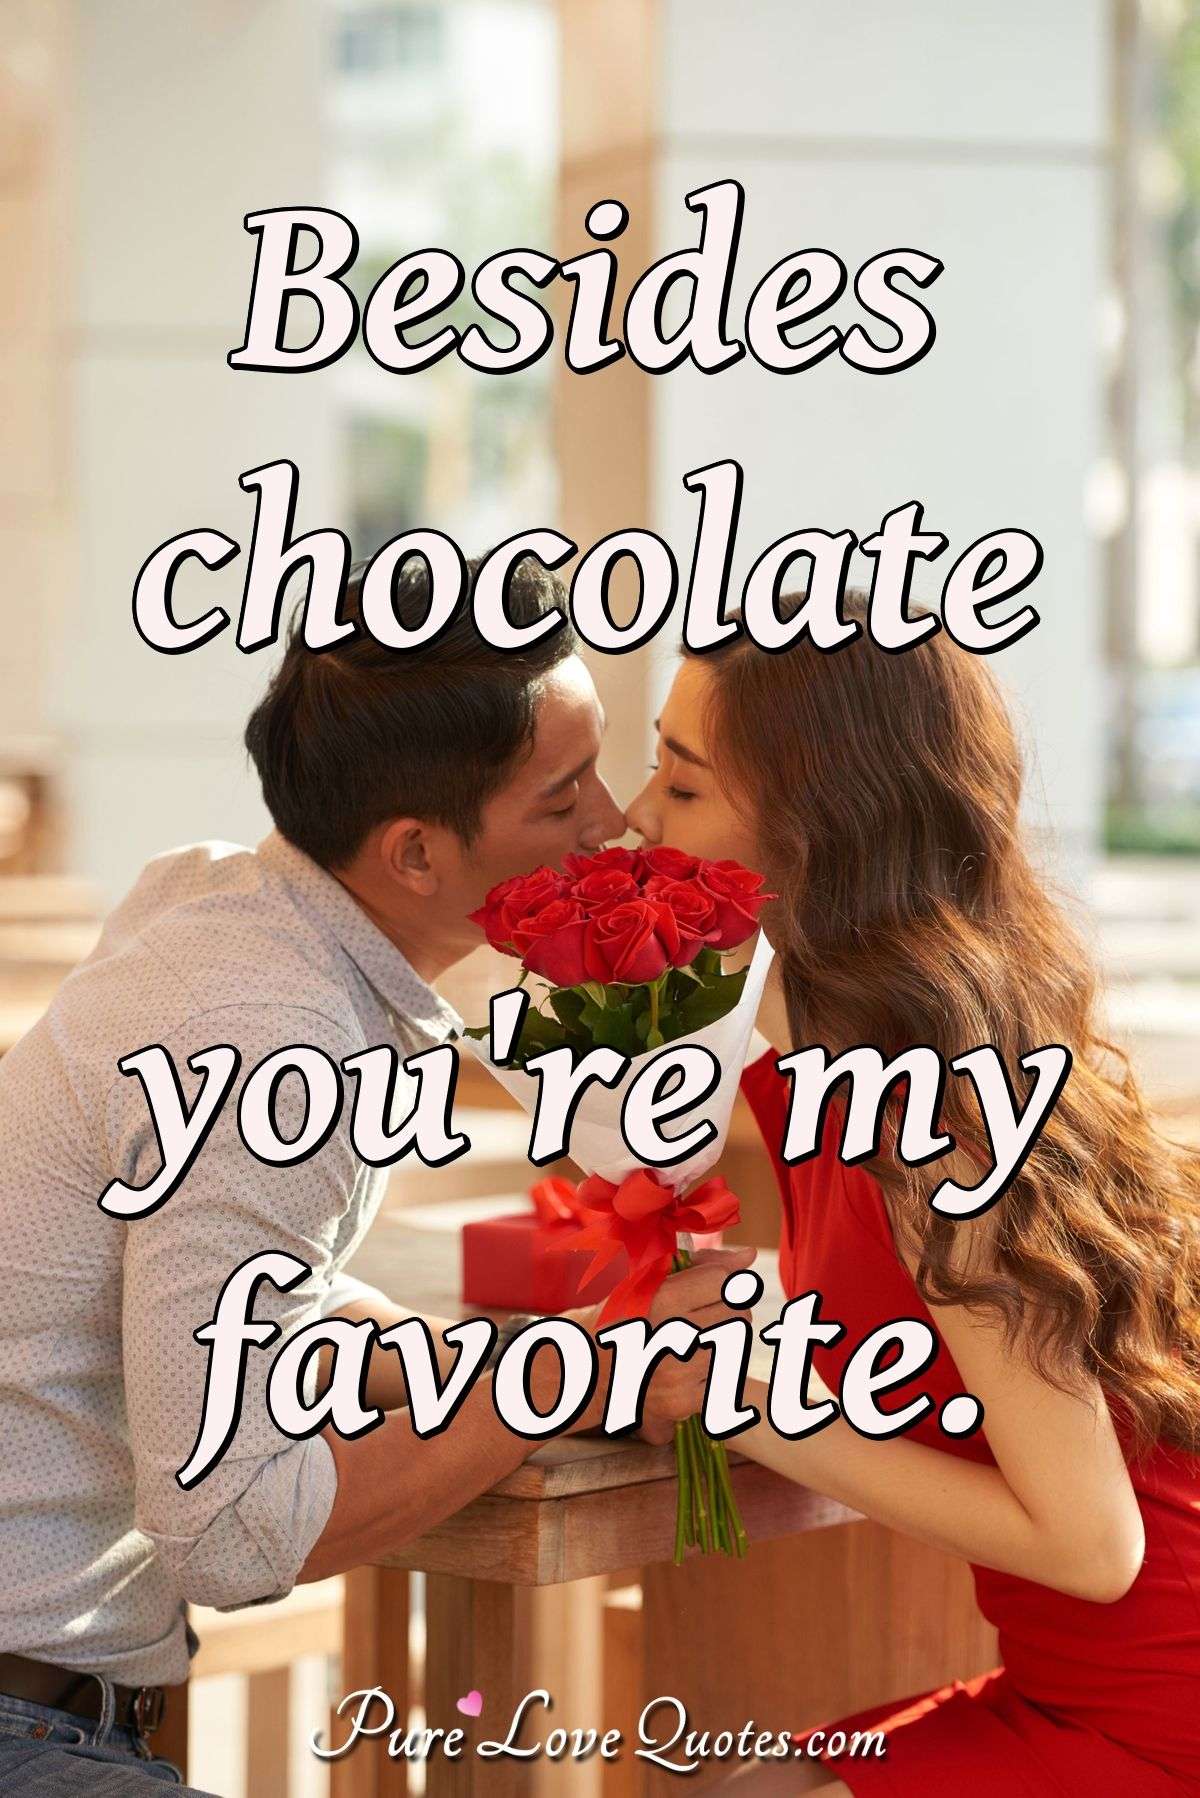 Besides chocolate you're my favorite. - Anonymous